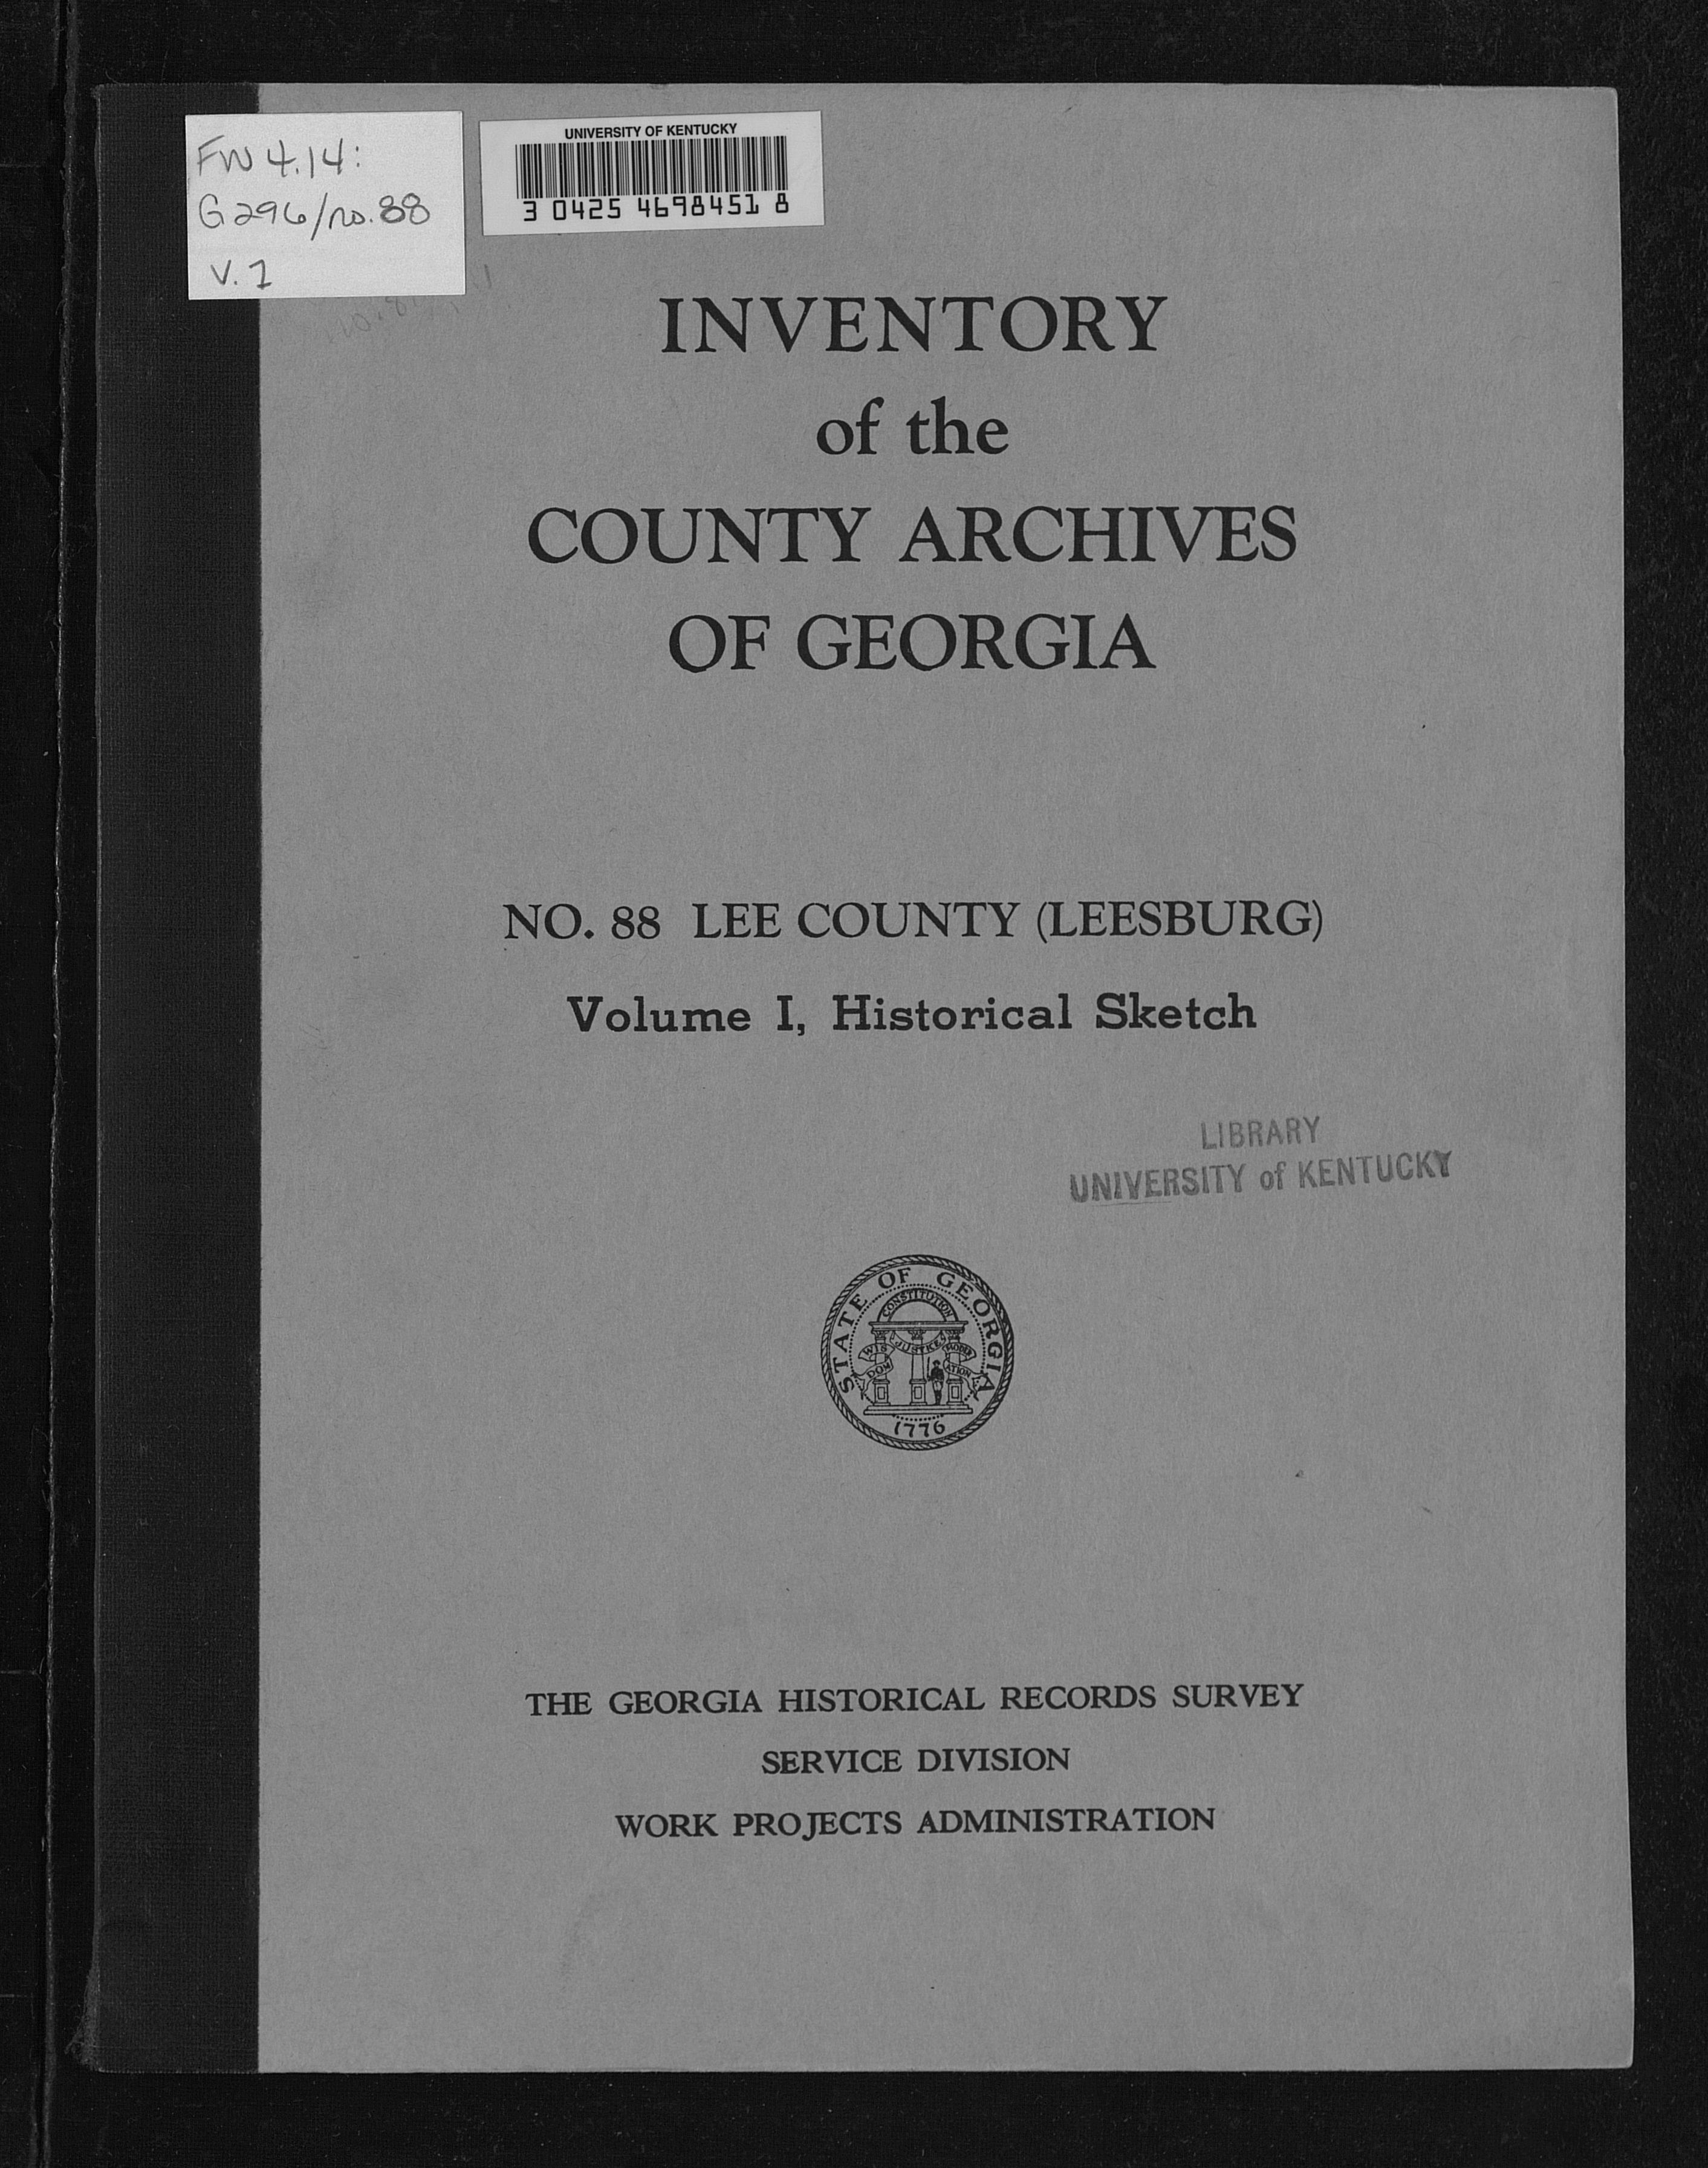 Inventory of the County Archives of Georgia, Number 88, Volume I Lee County  (Leesburg)